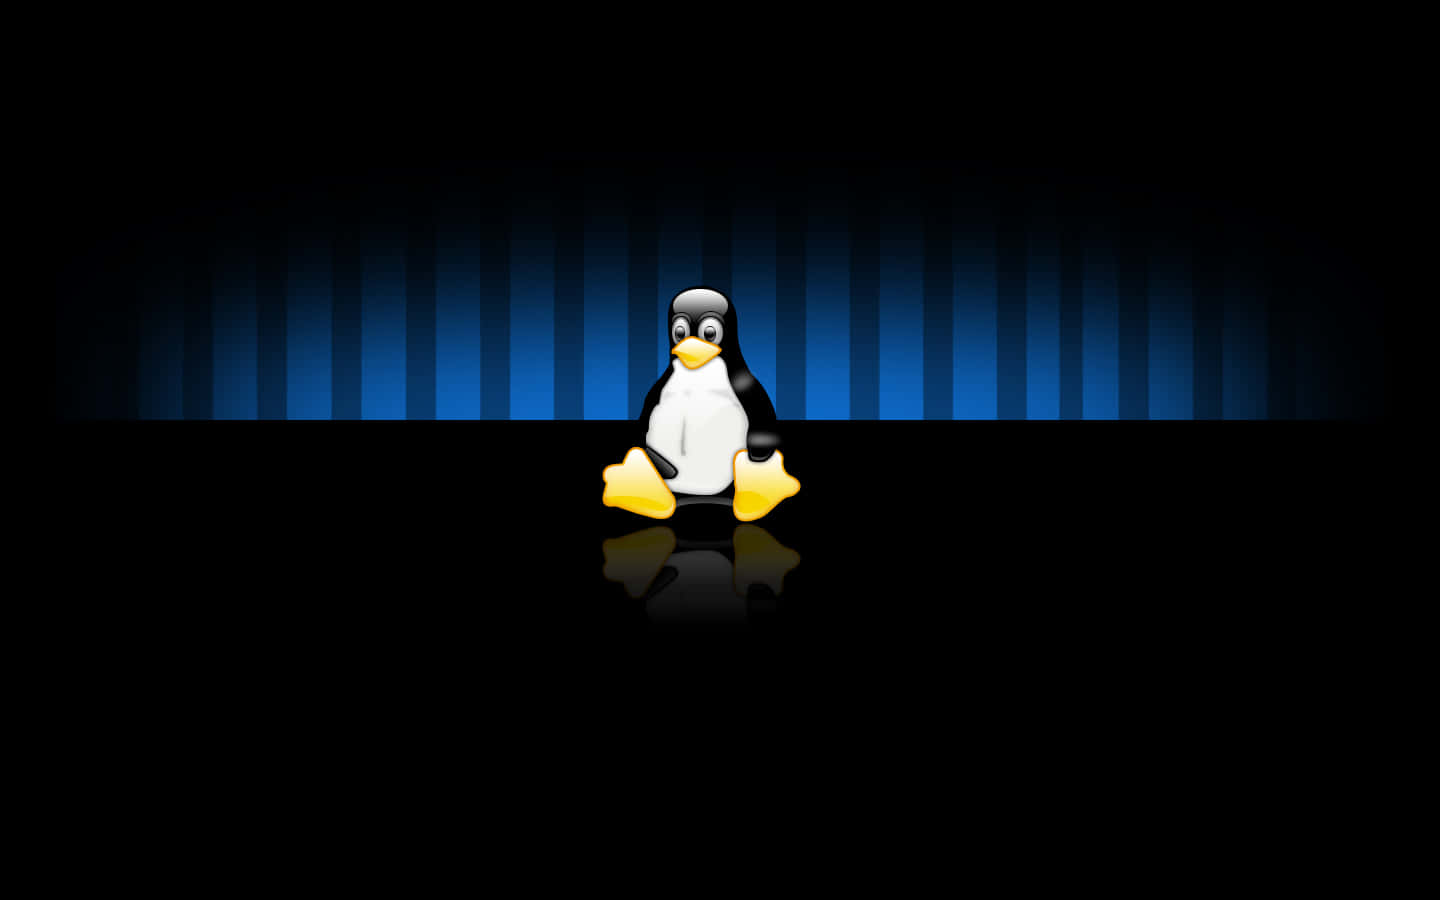 A Penguin Standing On A Black Background